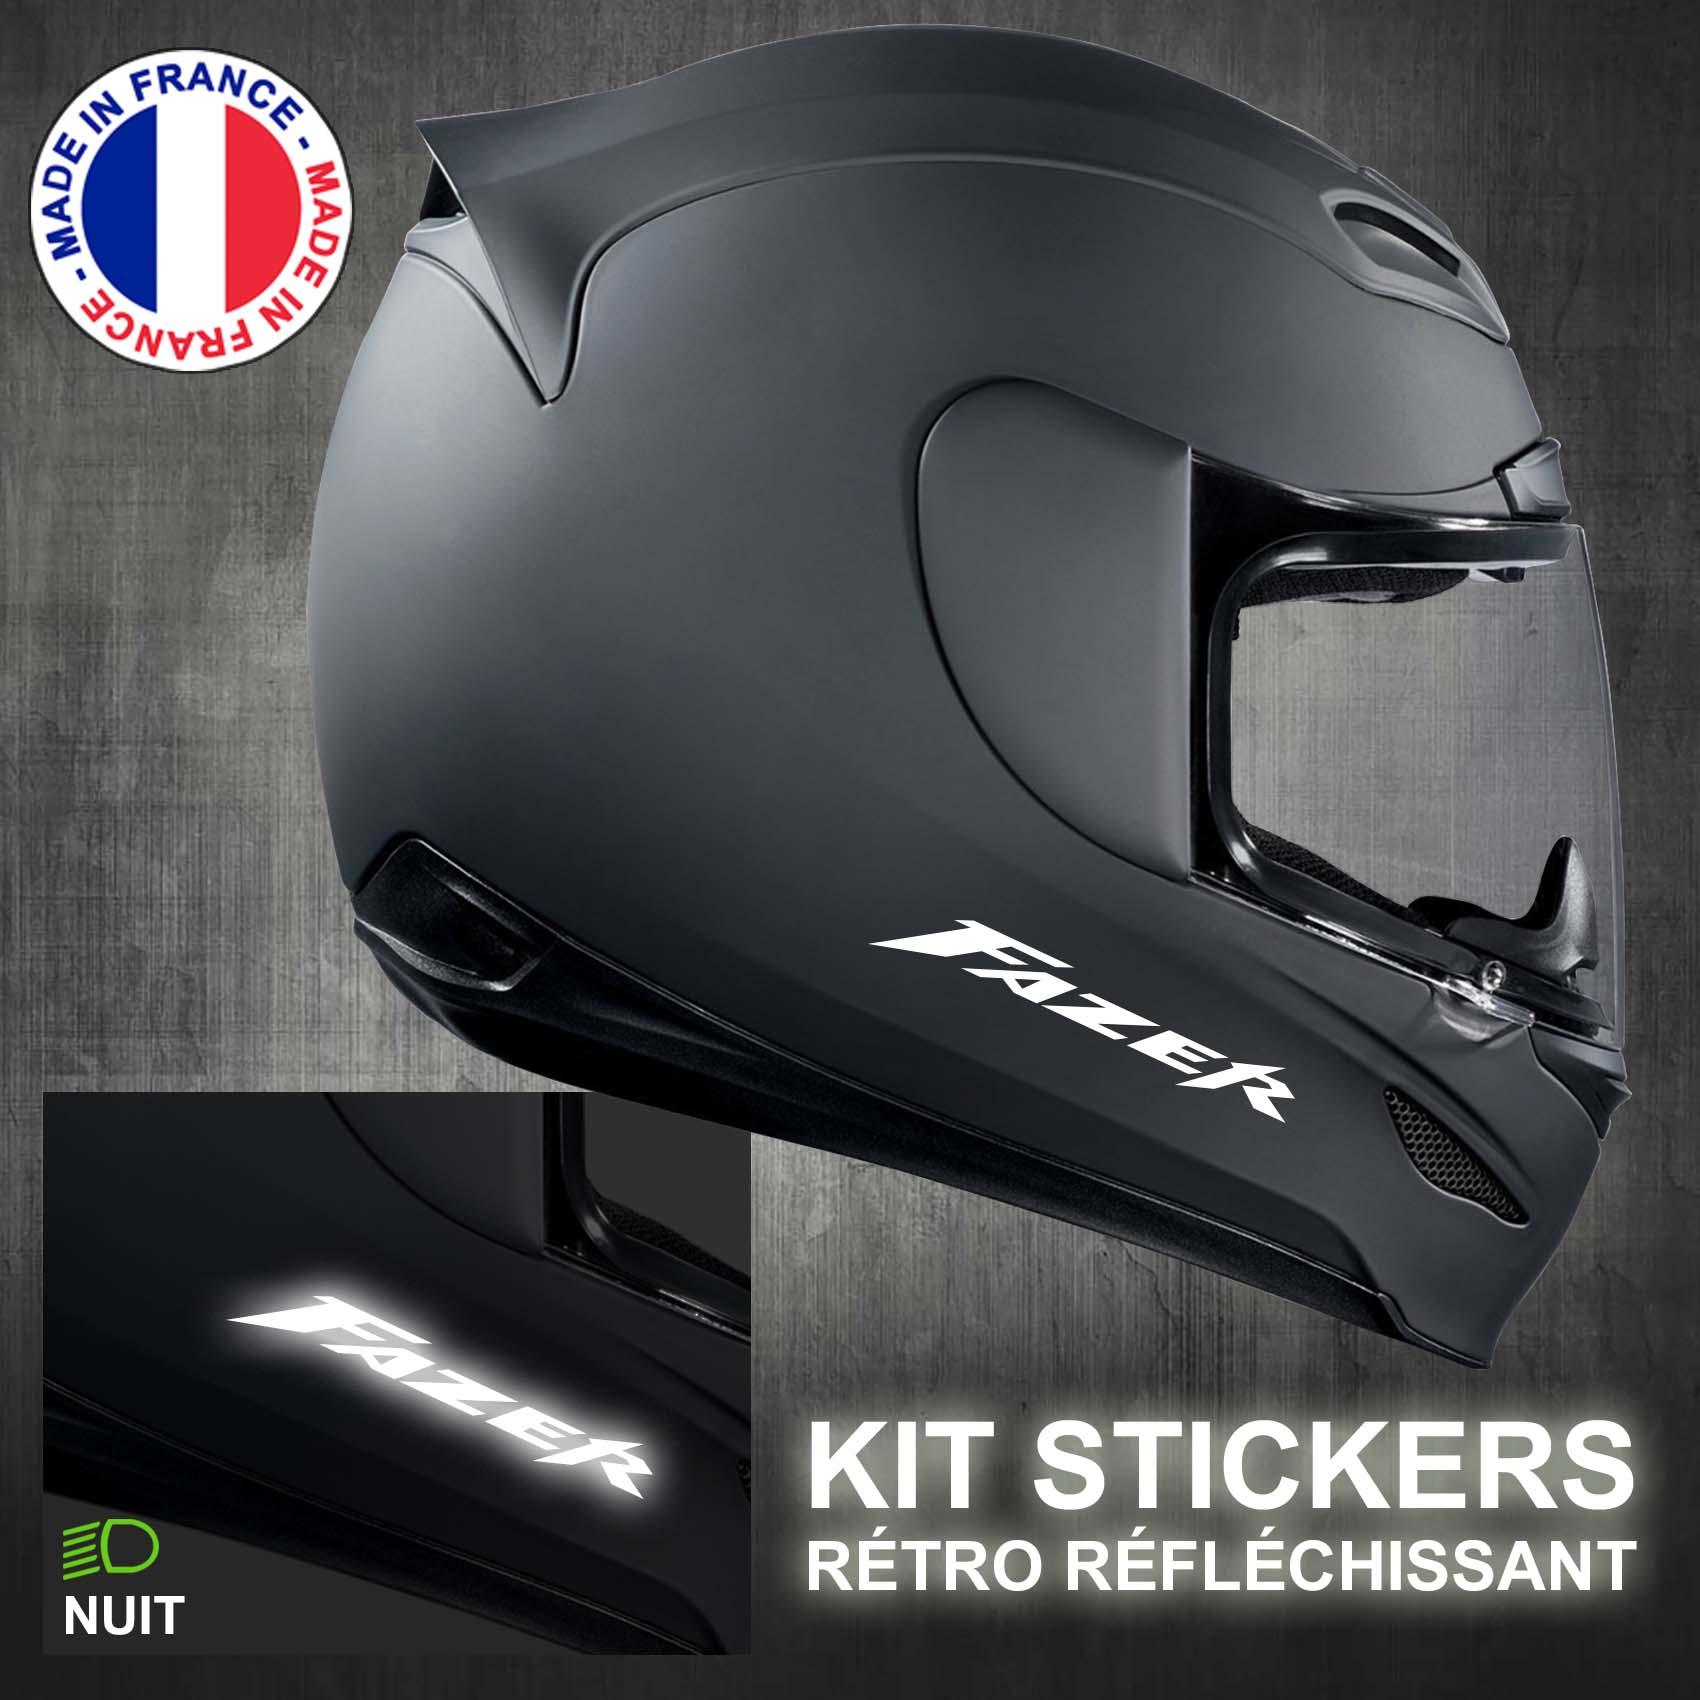 stickers-casque-moto-fazer-ref2-retro-reflechissant-autocollant-noir-moto-velo-tuning-racing-route-sticker-casques-adhesif-scooter-nuit-securite-decals-personnalise-personnalisable-min